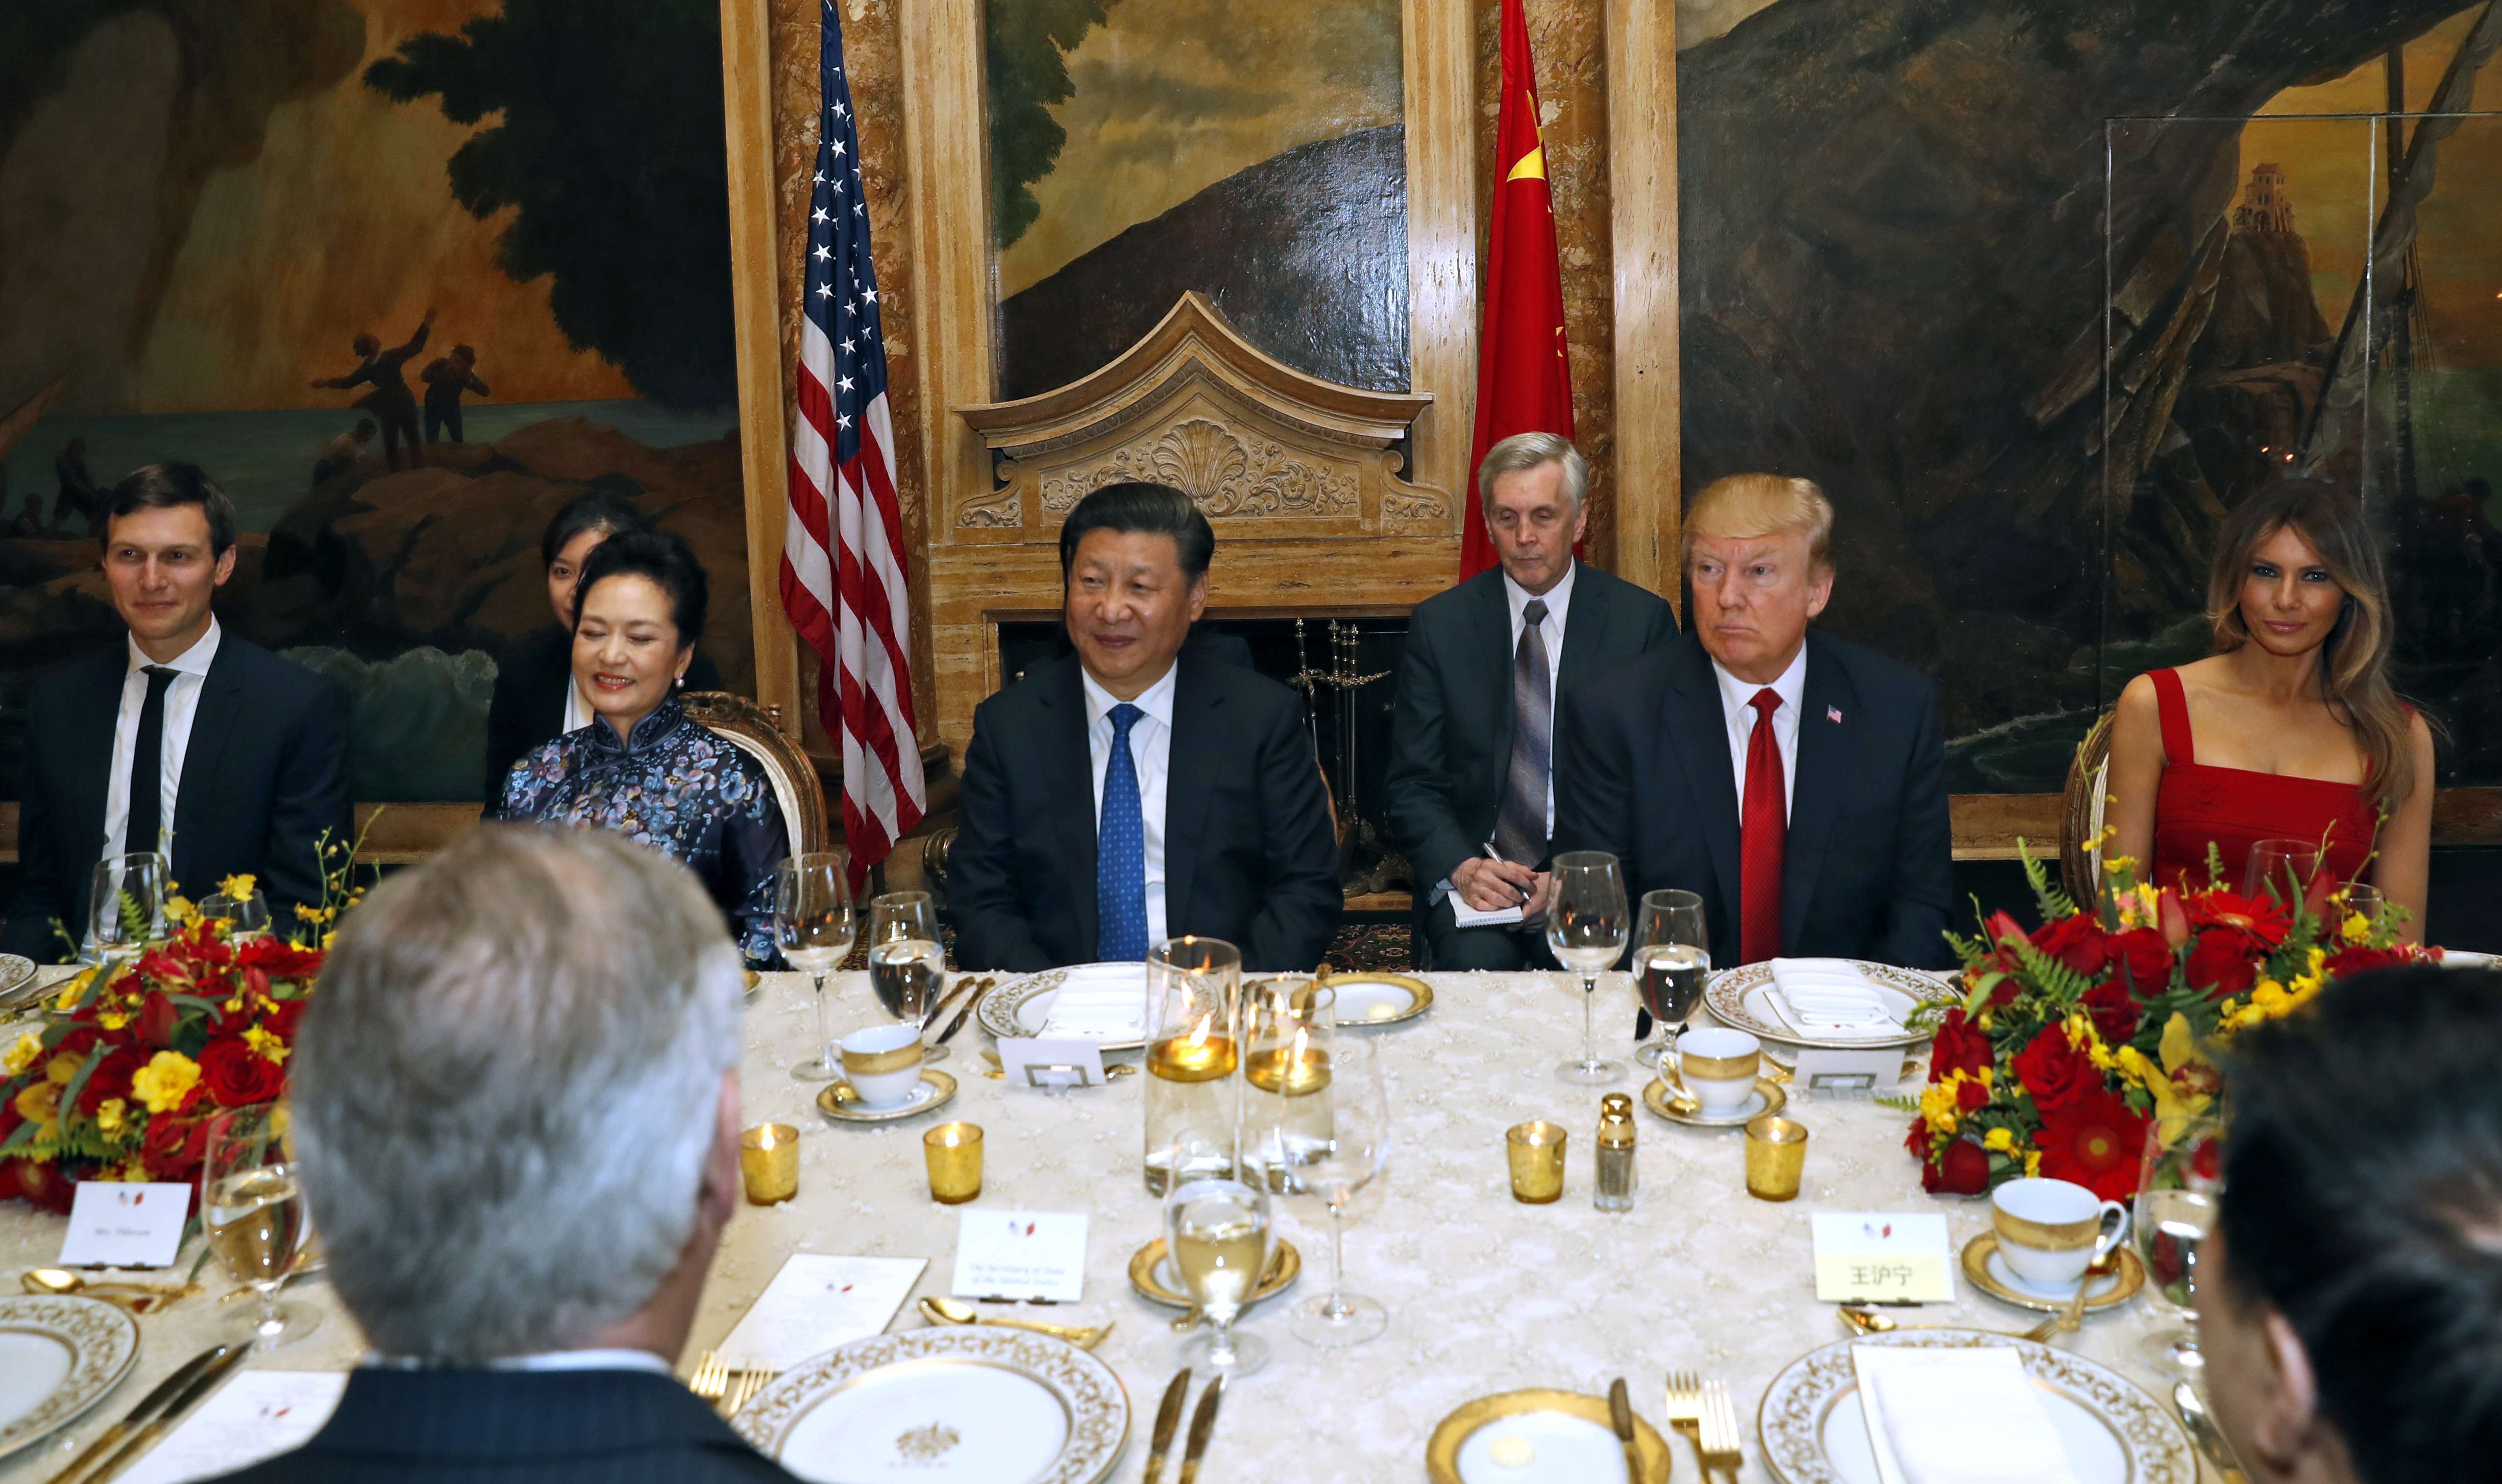 US President Donald Trump and Chinese President Xi Jinping, with their wives, first lady Melania Trump and Chinese first lady Peng Liyuan are seated during a dinner at Mar-a-Lago in Palm Beach. Photo: AP